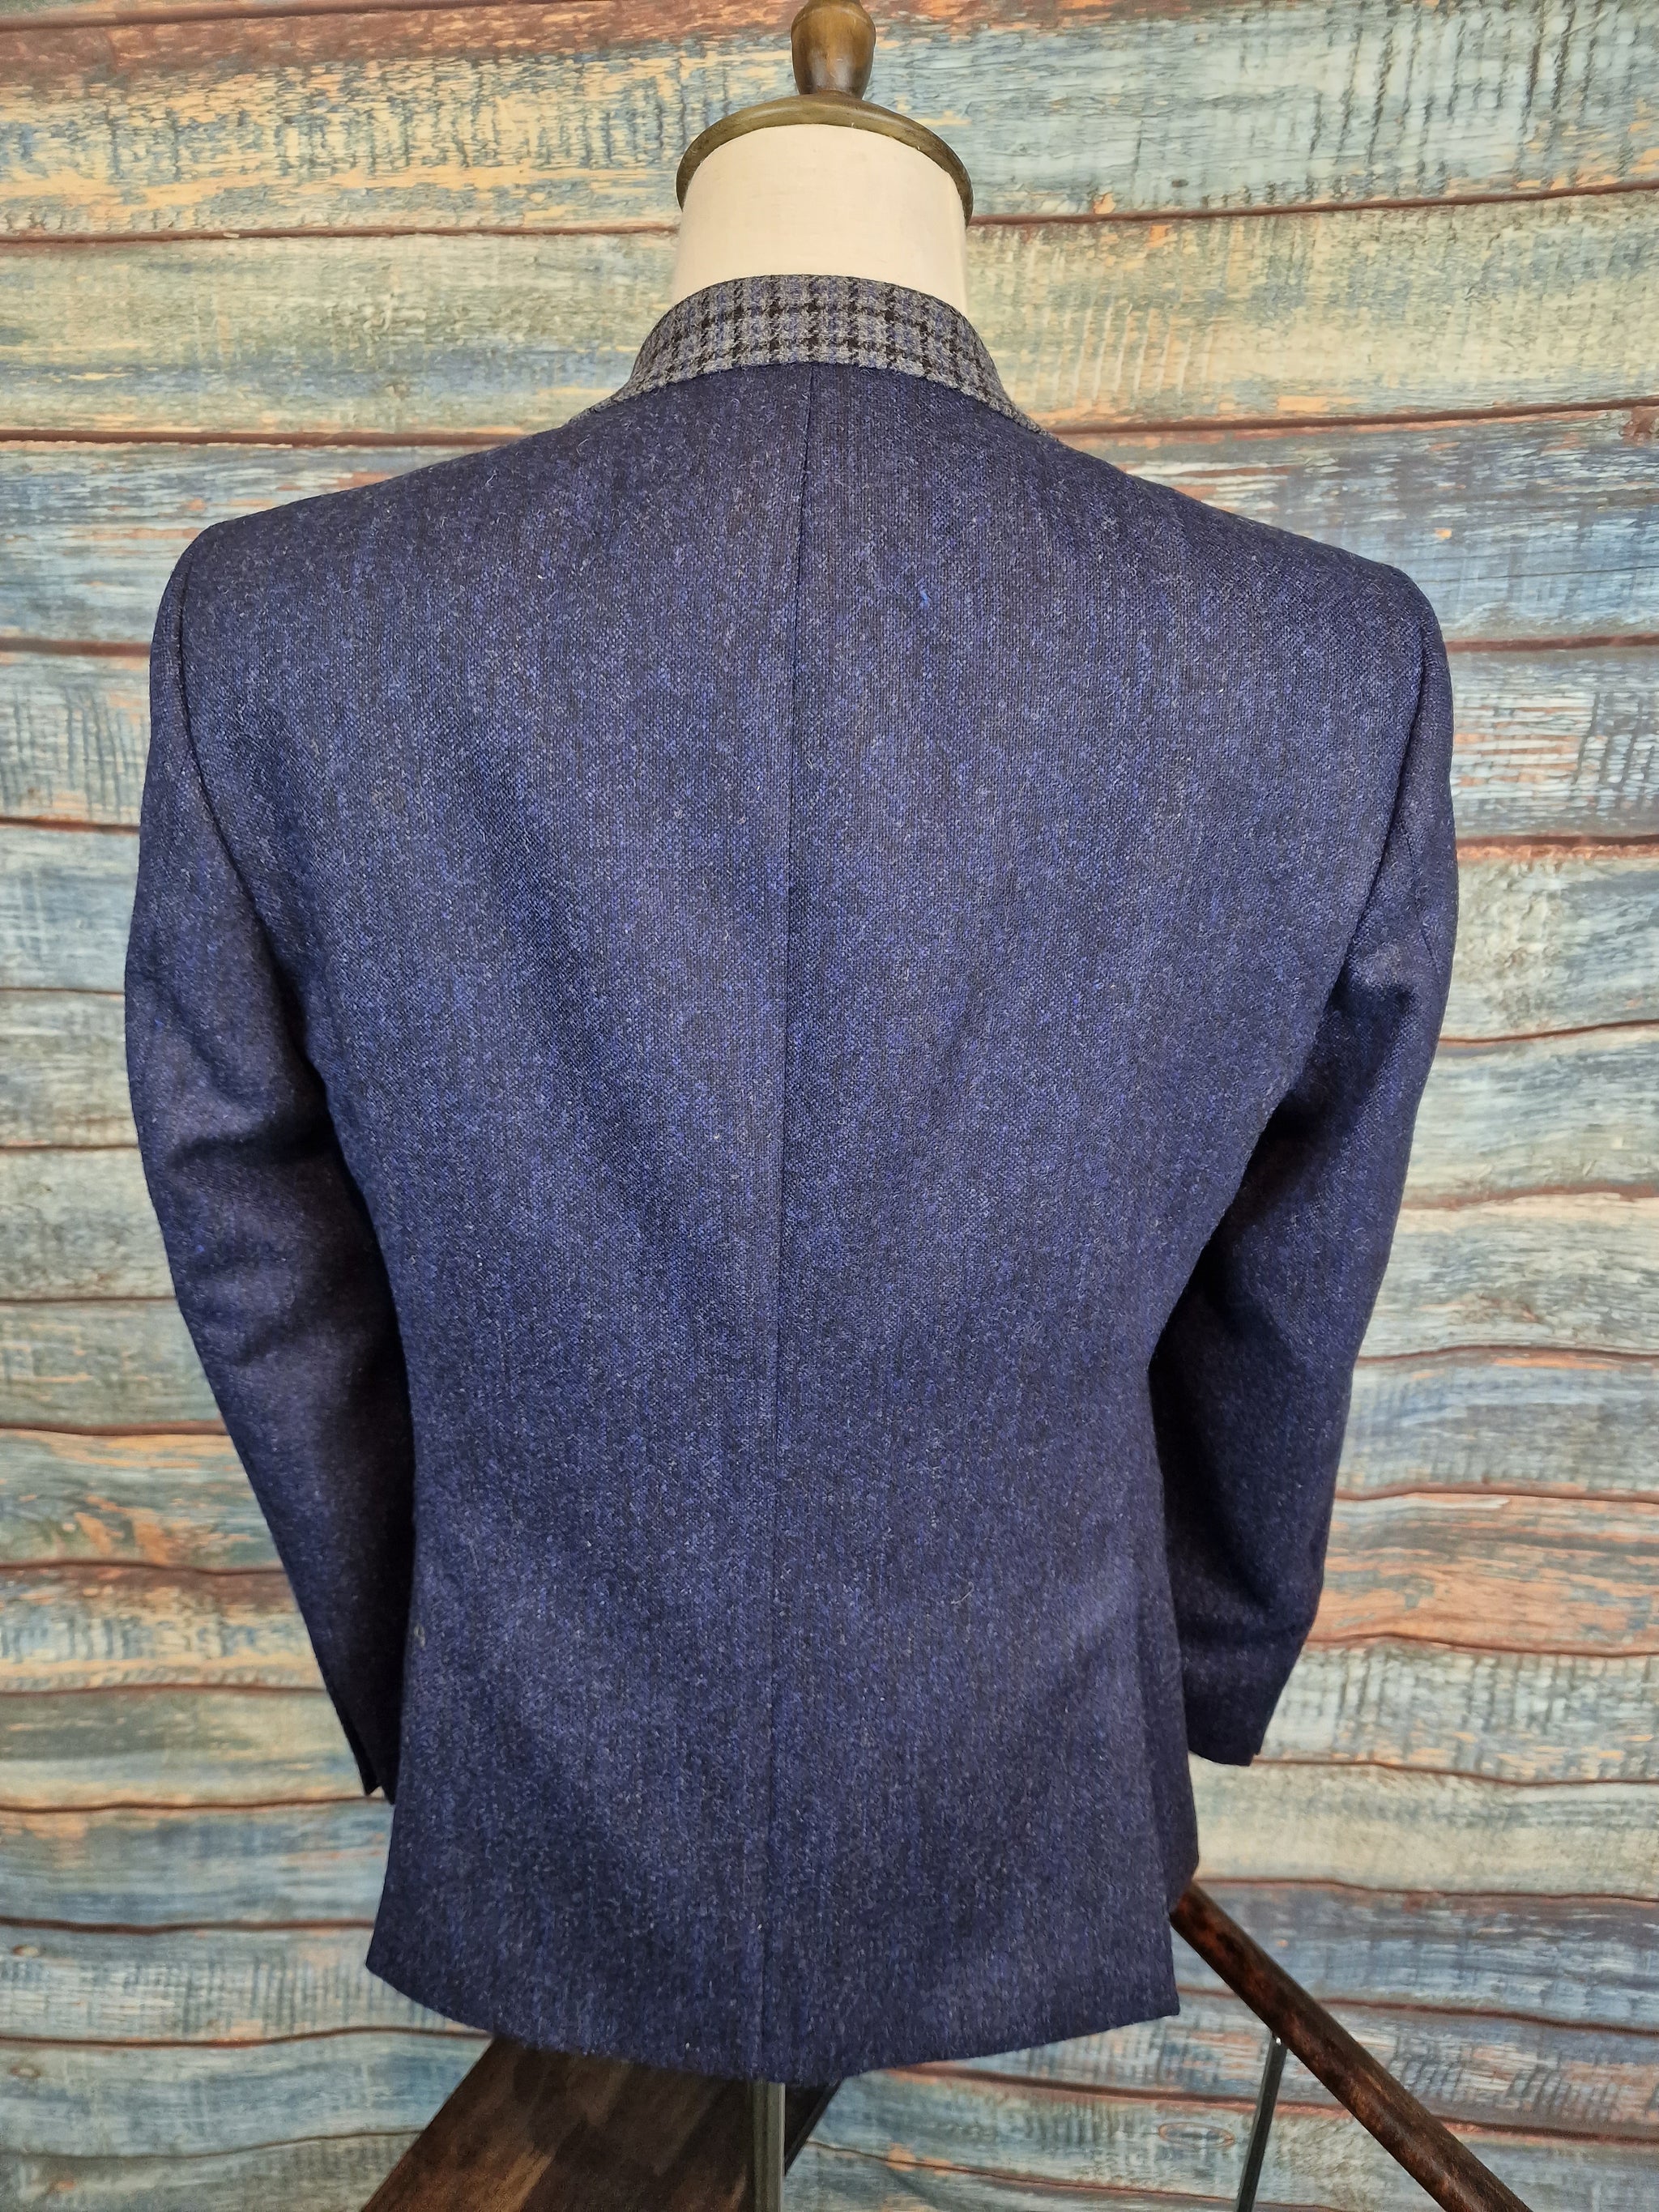 Mazzelli Navy Shetland tweed with Check Collar and trims